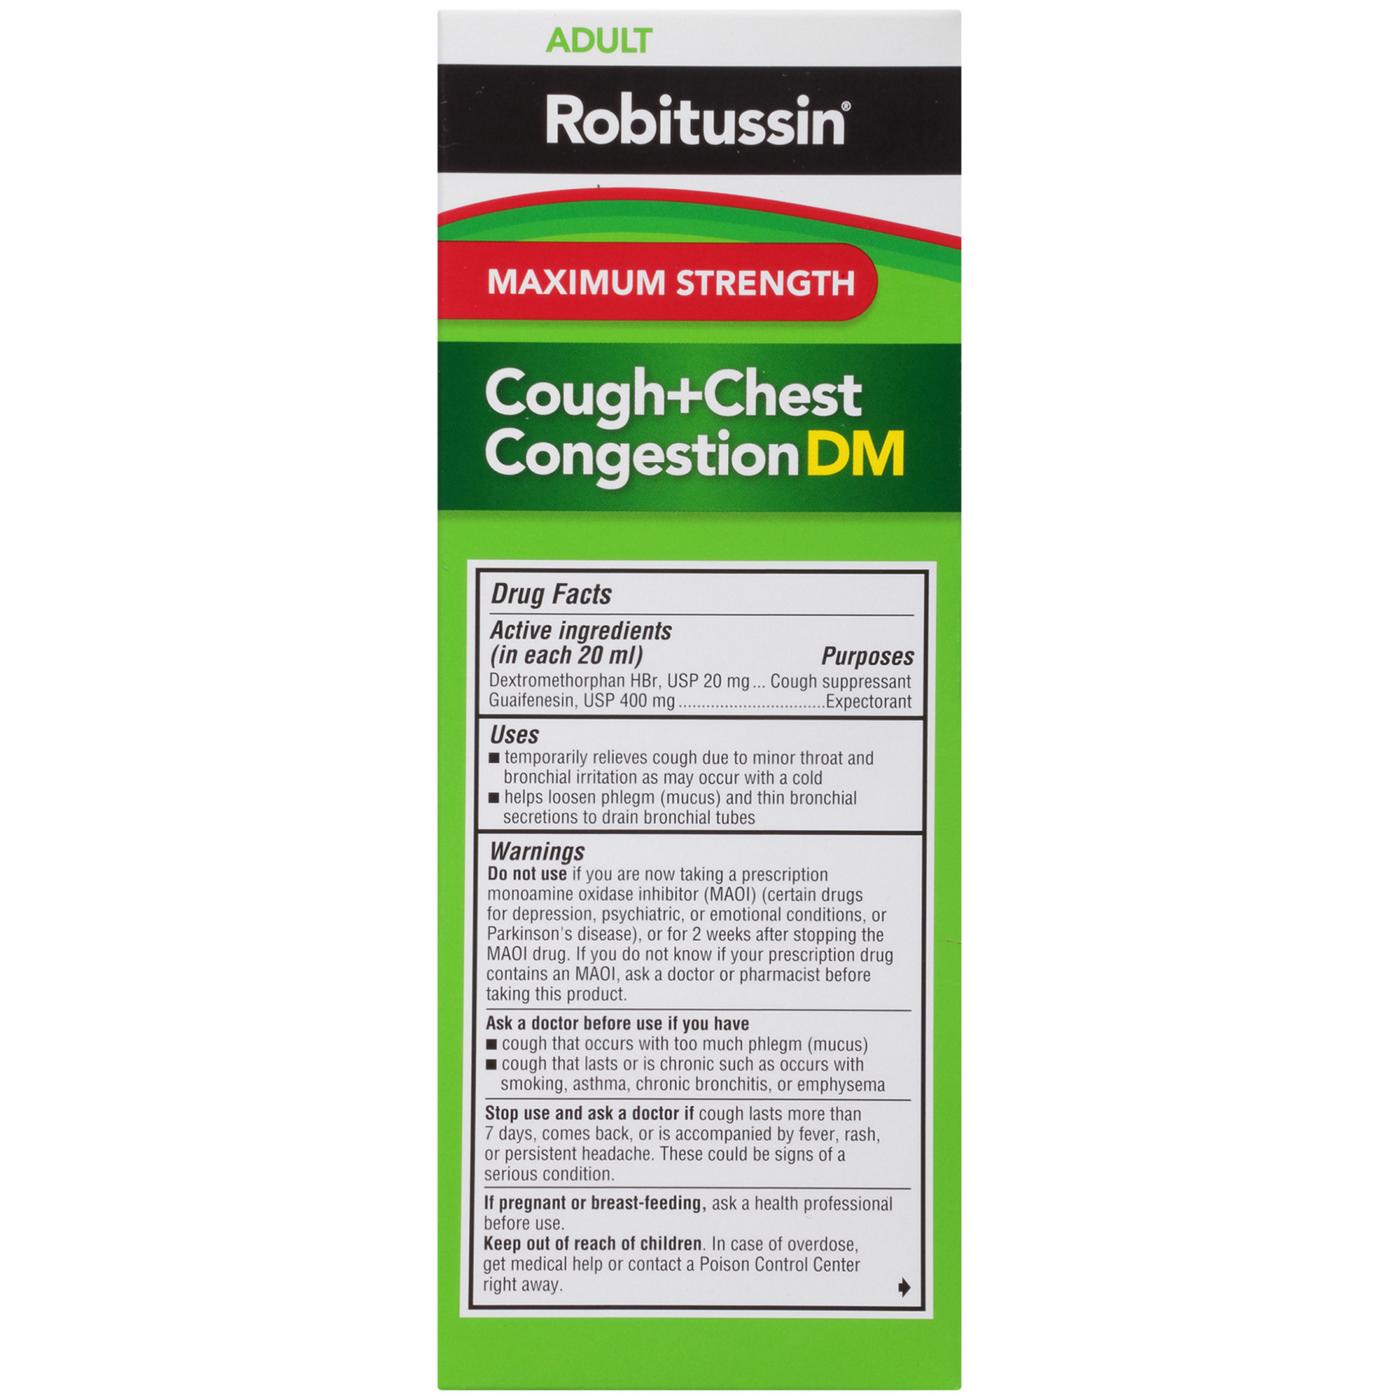 Robitussin Max Strength Cough + Chest Congestion DM - Raspberry; image 4 of 8